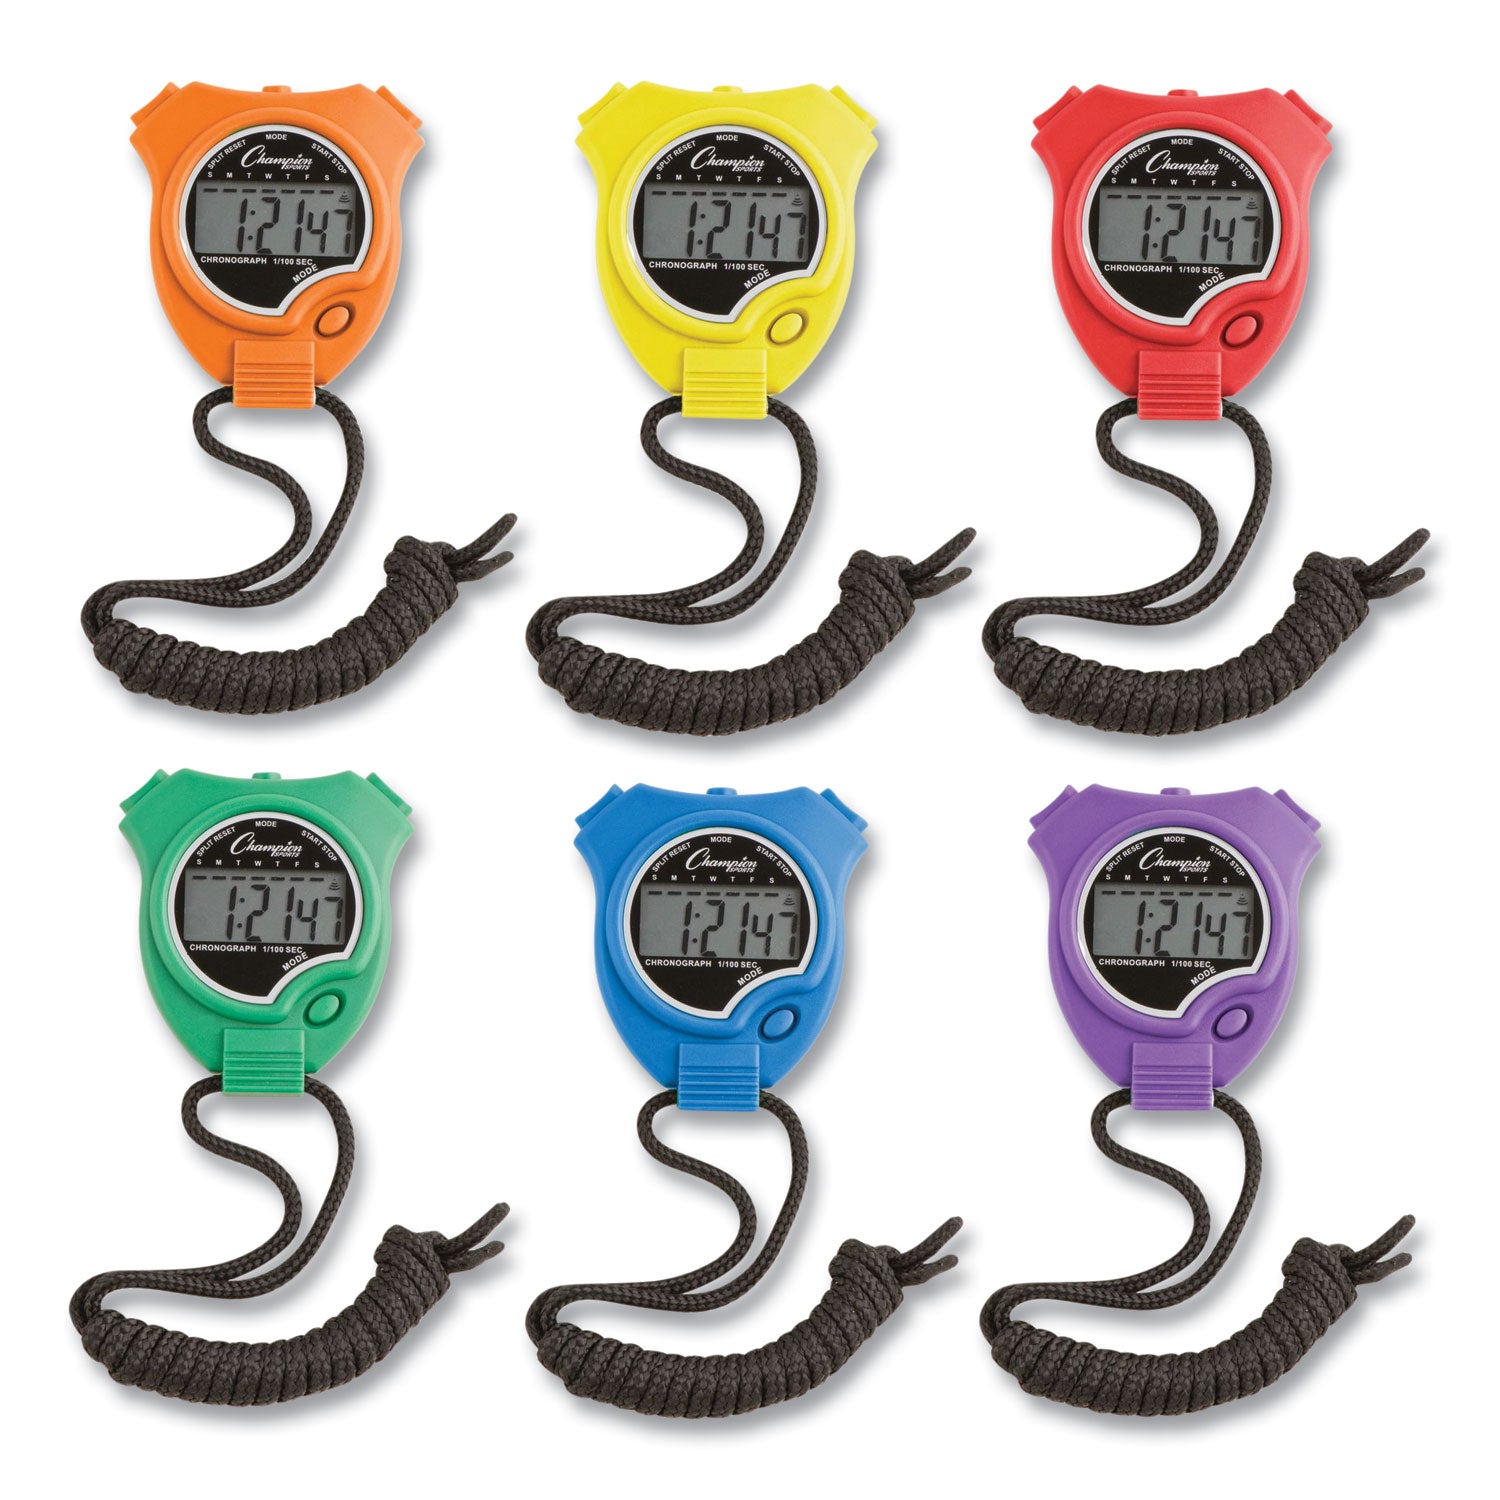 Water-Resistant Stopwatches, Accurate to 1/100 Second, Assorted Colors, 6/Box - 